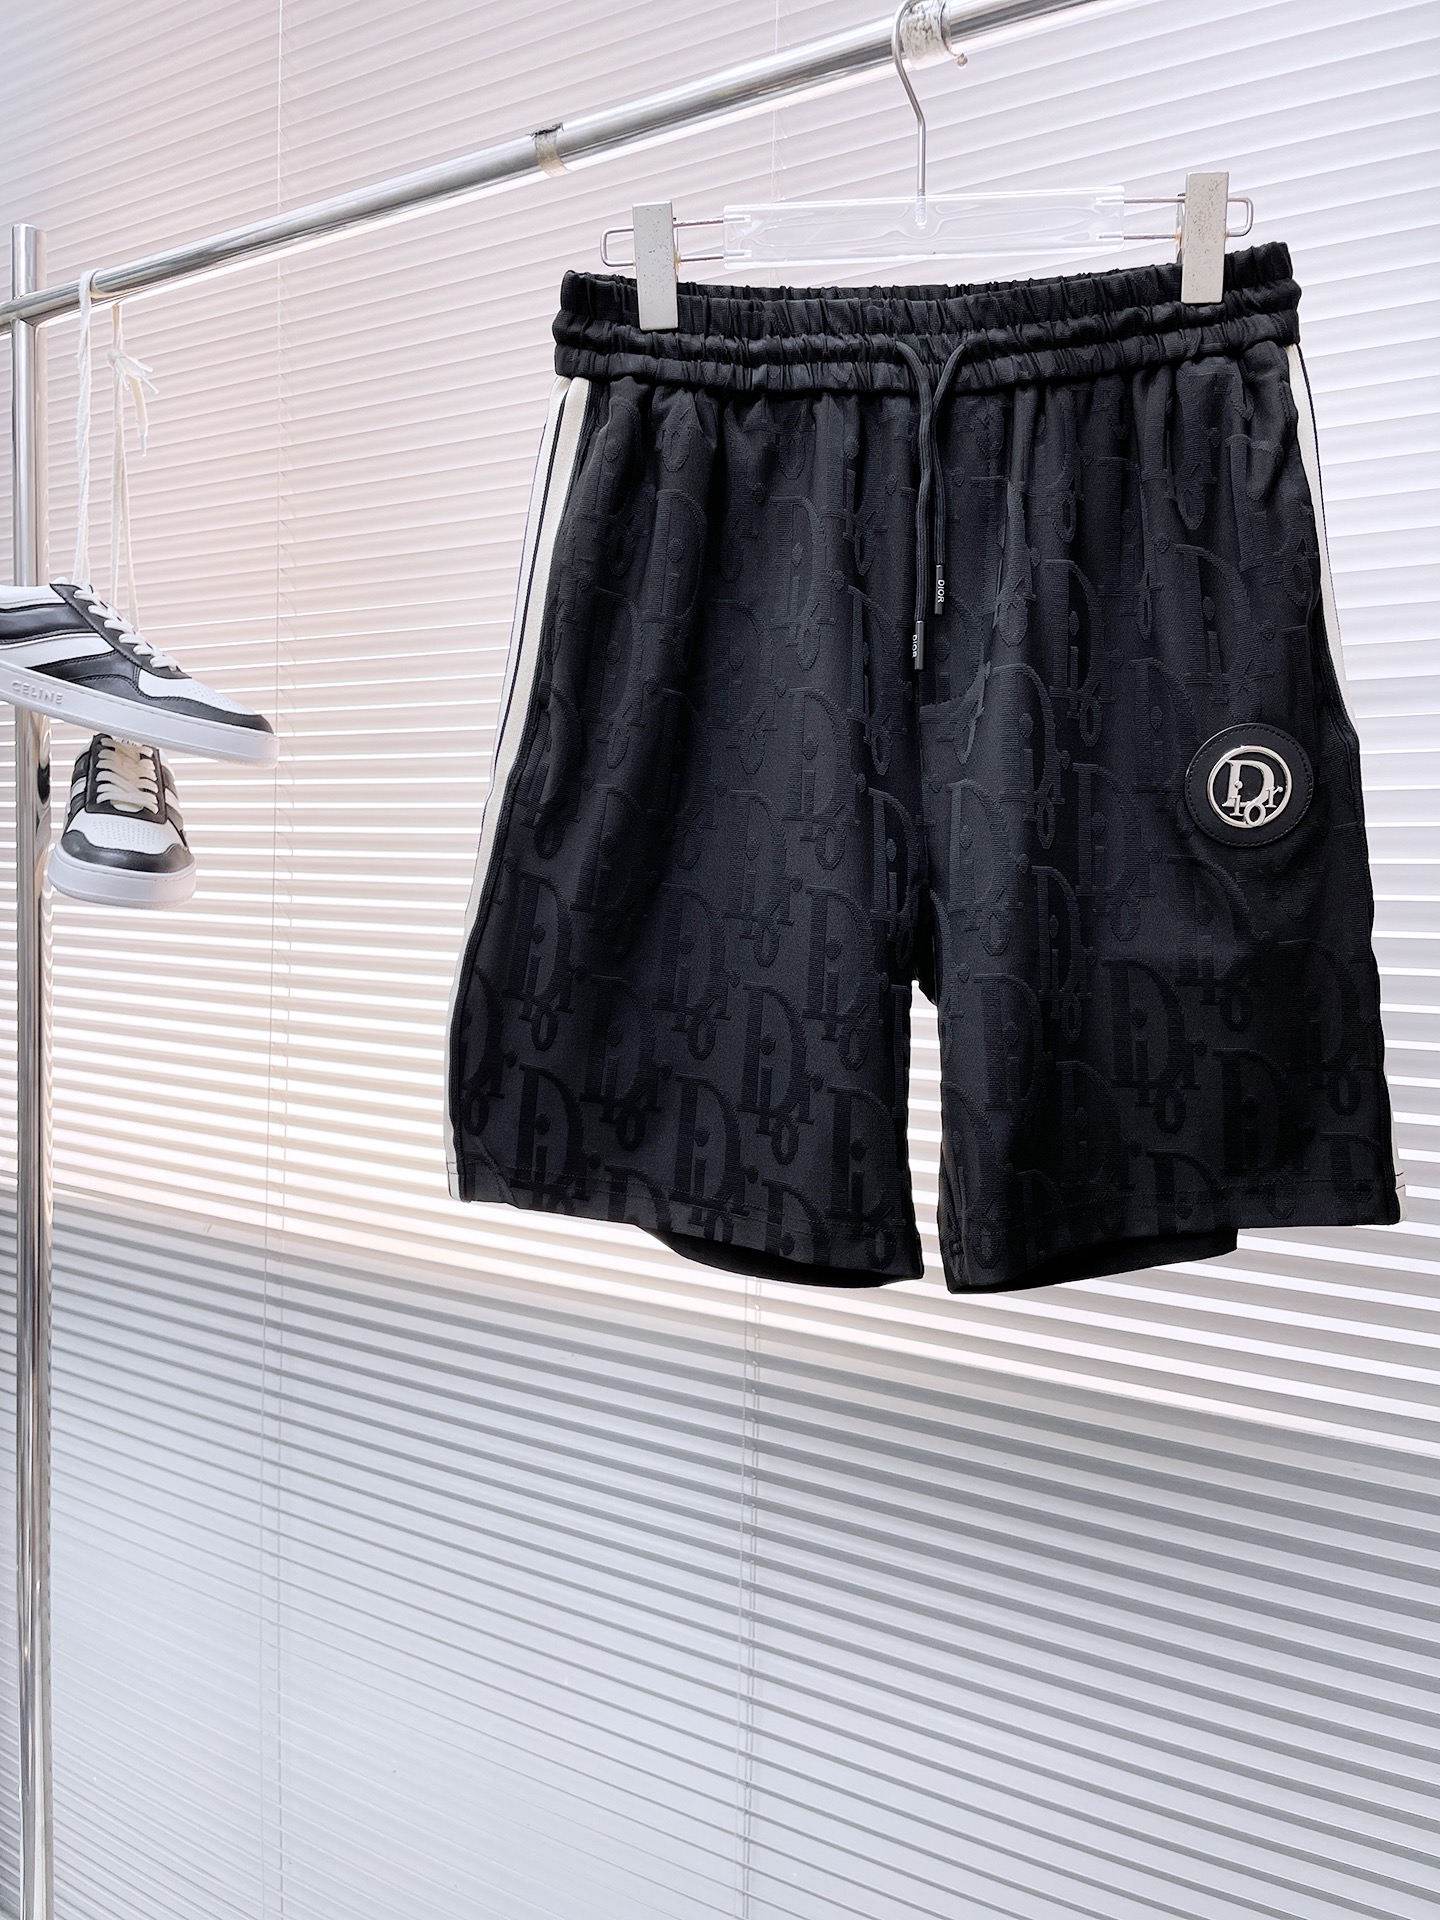 Dior Clothing Shorts Best AAA+
 Men Spring/Summer Collection Fashion Casual